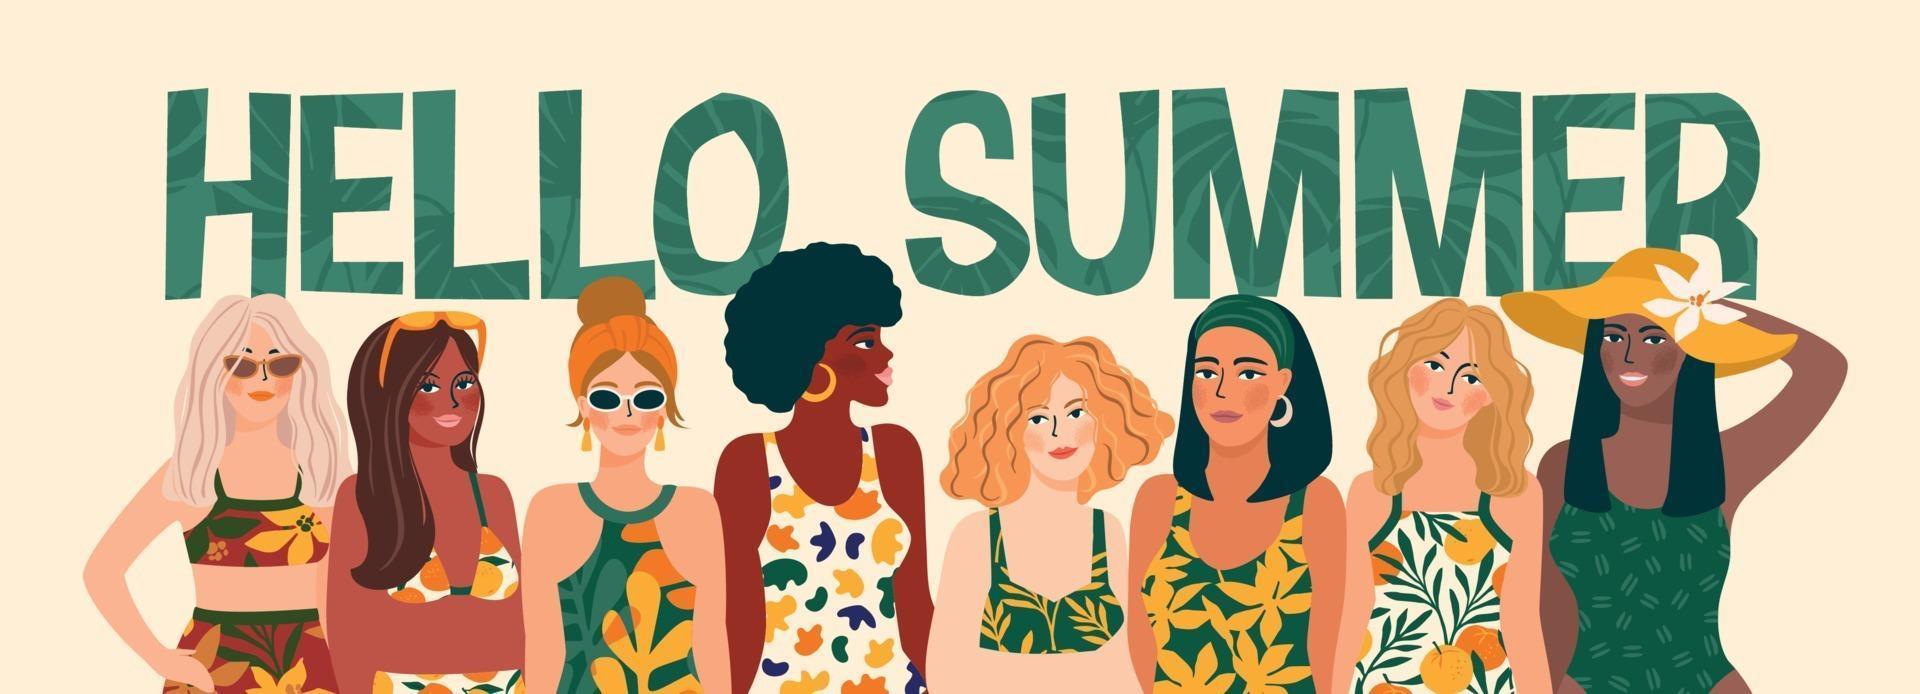 Vector illustration of women in bright swimsuit. Young girls with different skin colors.